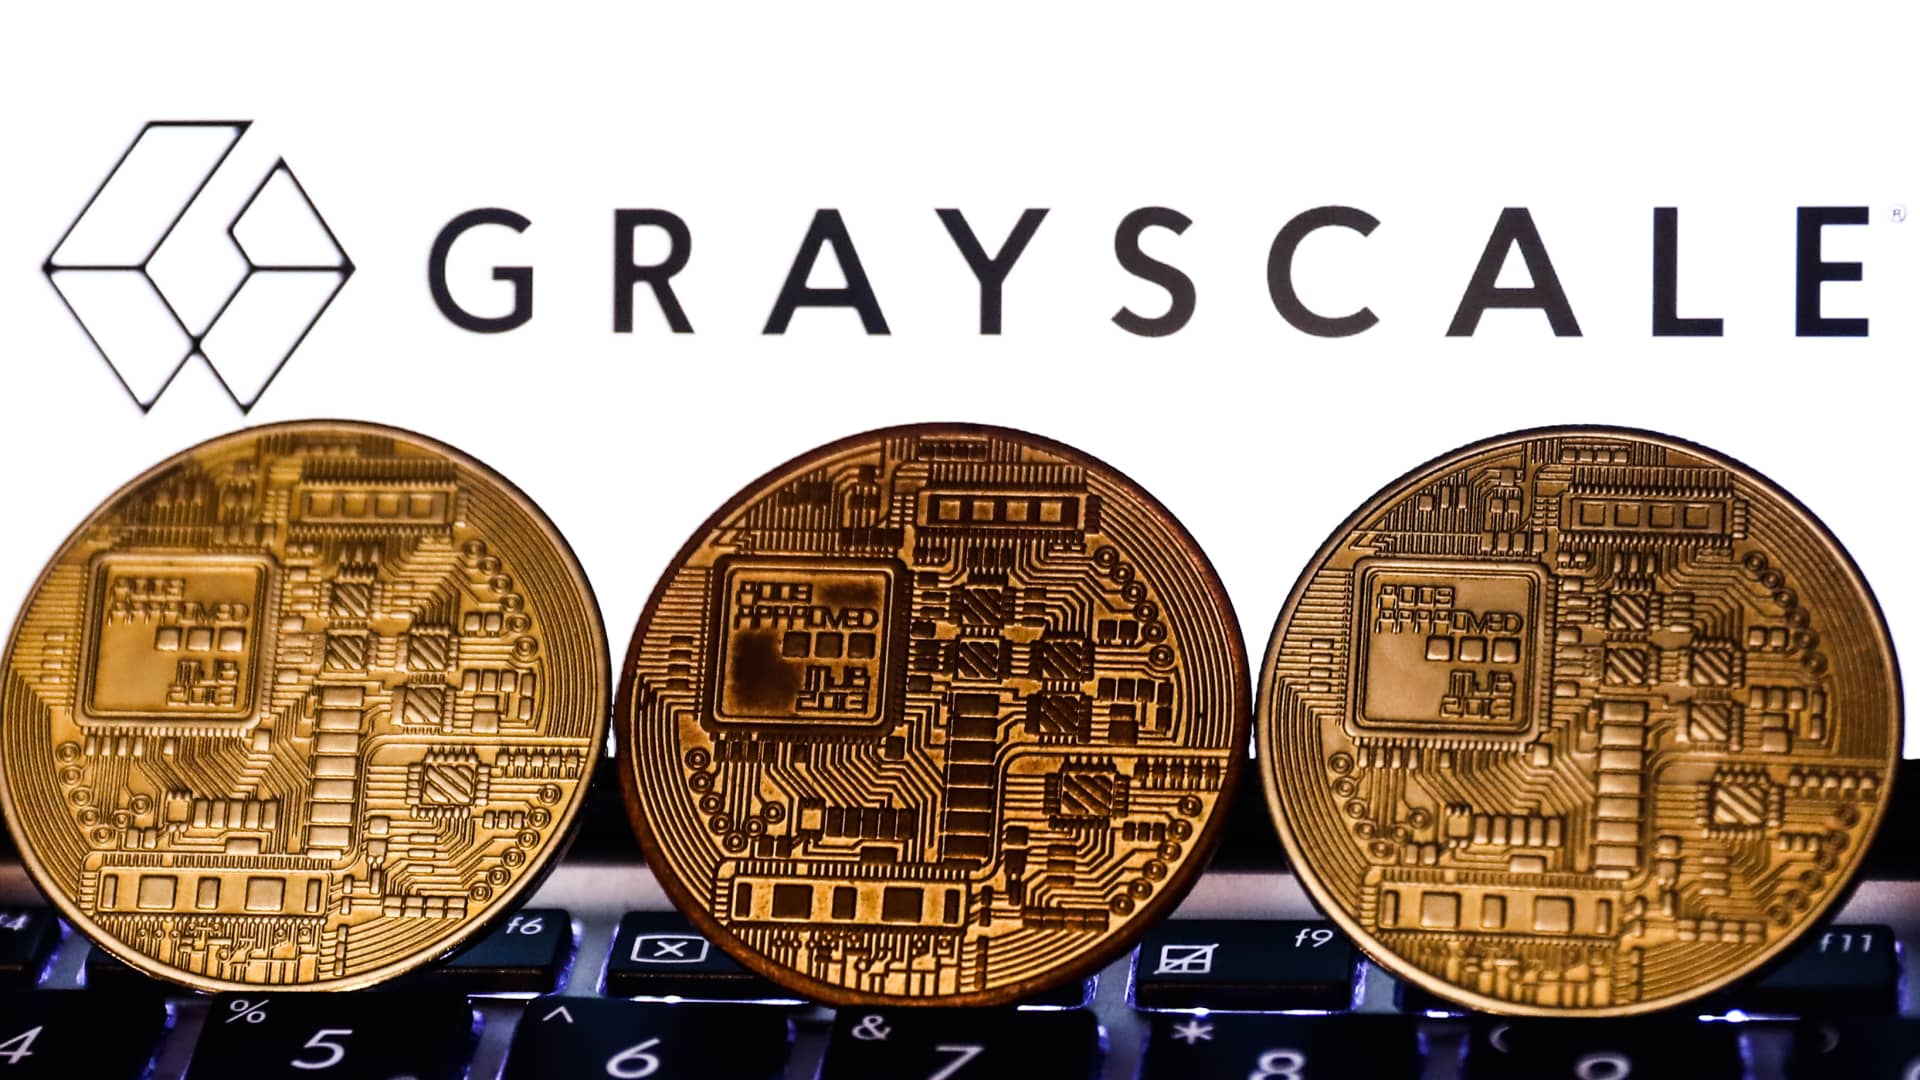 Representation of cryptocurrency and Gayscale logo displayed on a phone screen.